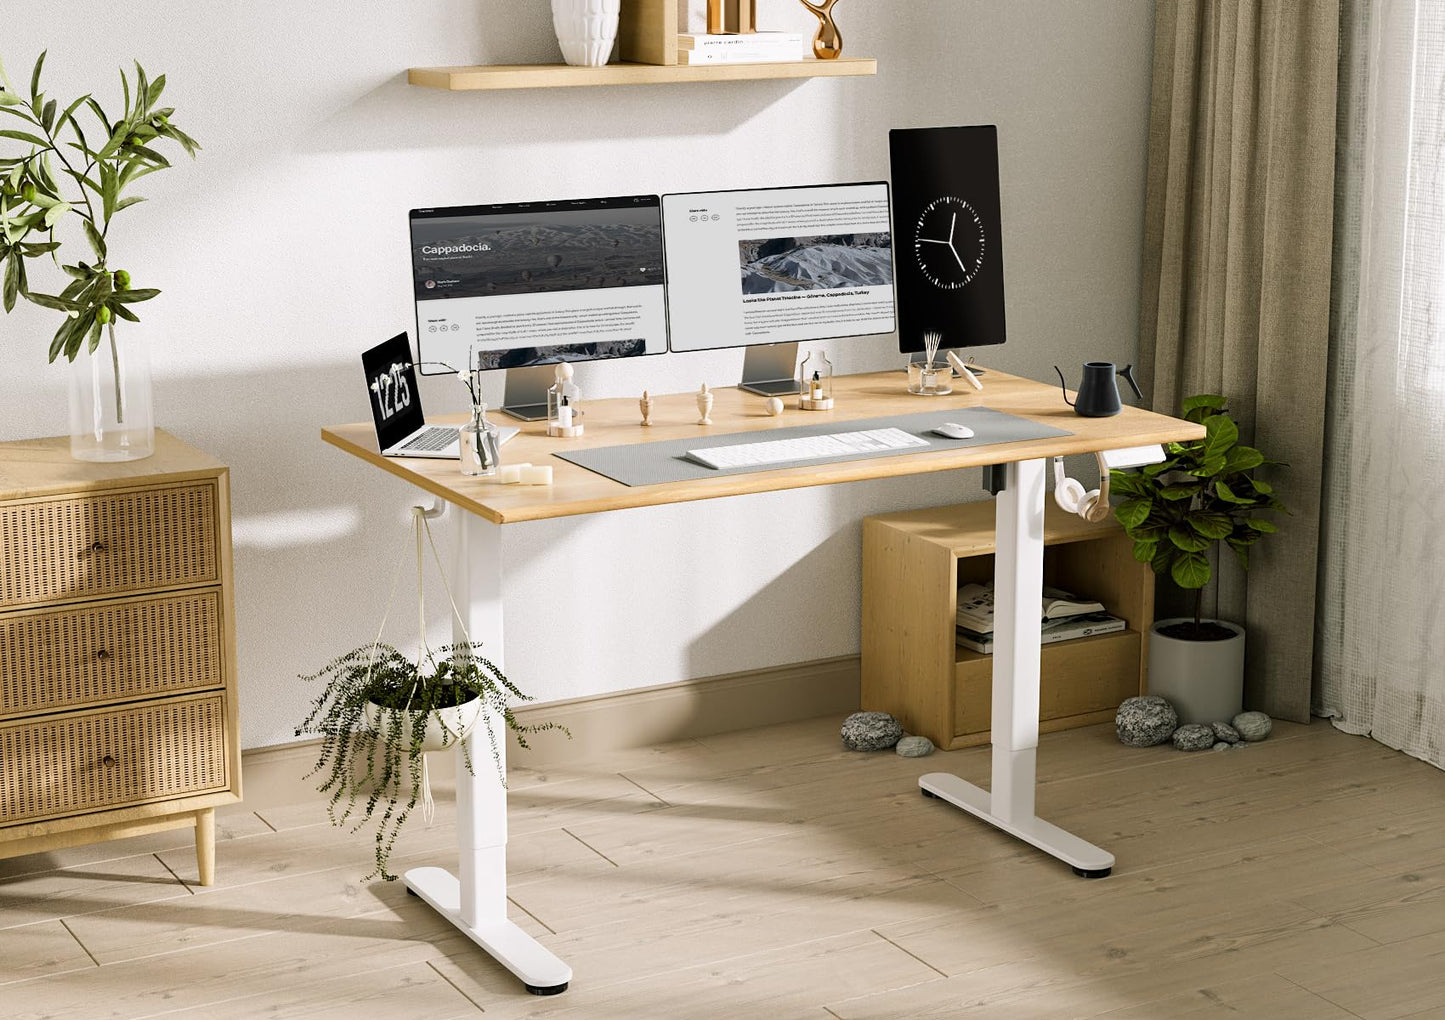 INNOVAR Solid Wood Electric Standing Desk, 55x24 Inches Adjustable Height Stand up Desk with Whole Piece Desktop, Sit Stand Home Office Desk White Frame/Nature Top